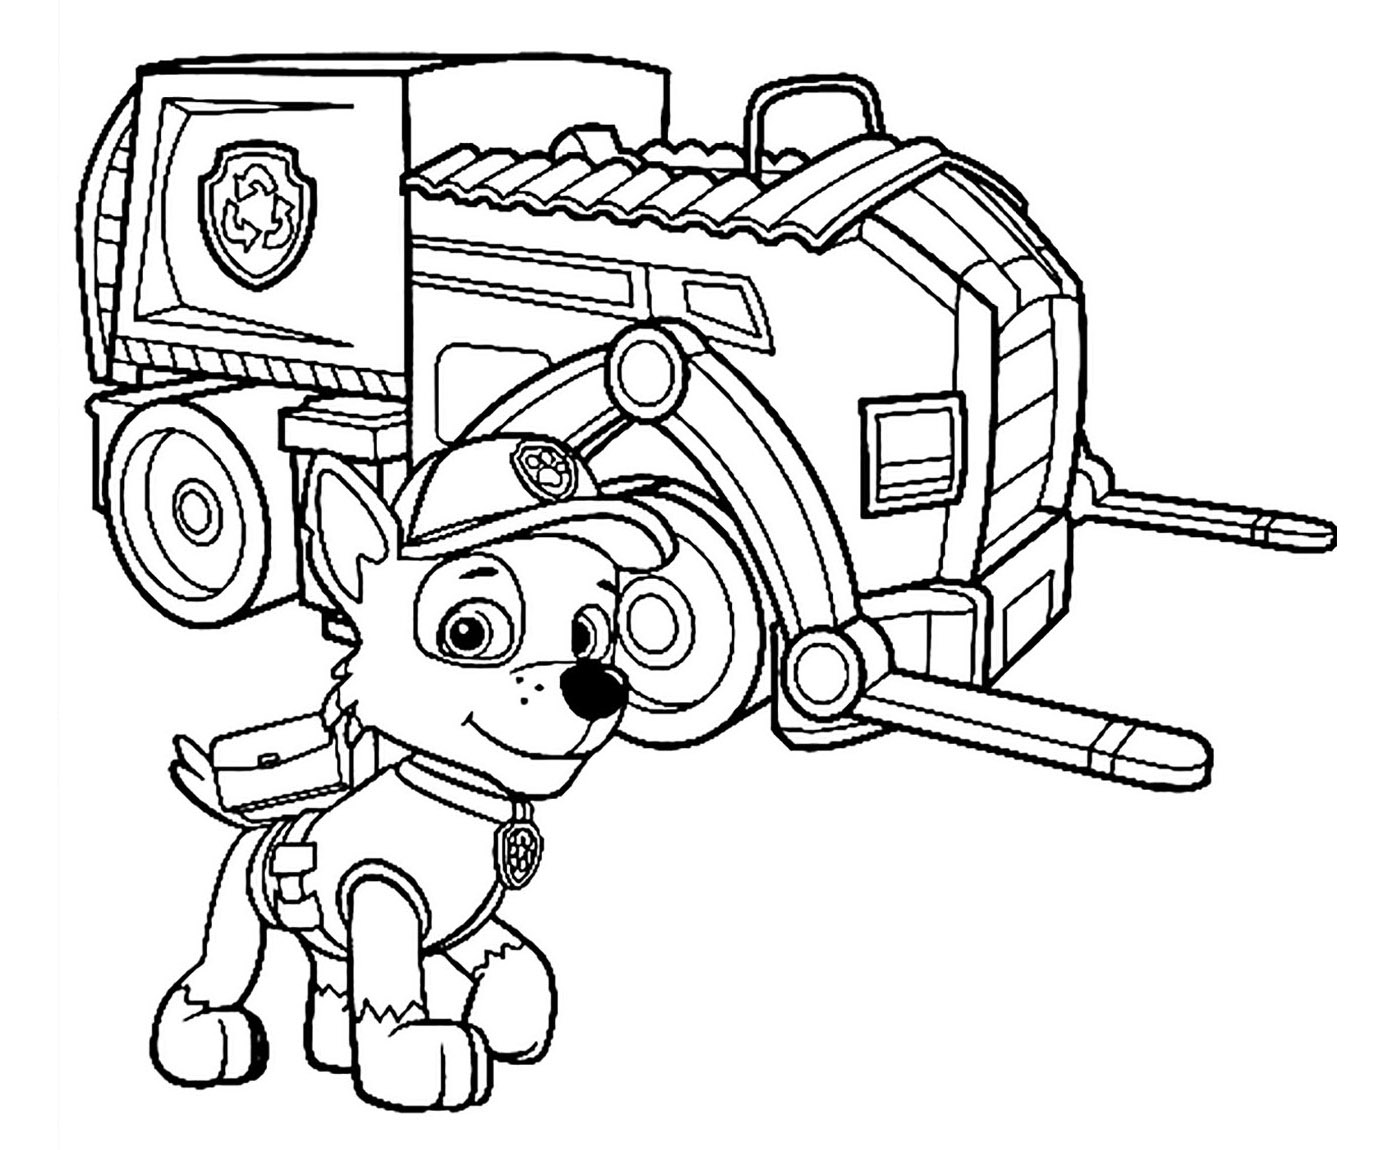 Simple Patrol Patrol coloring pages for kids: Super gear with Rocky